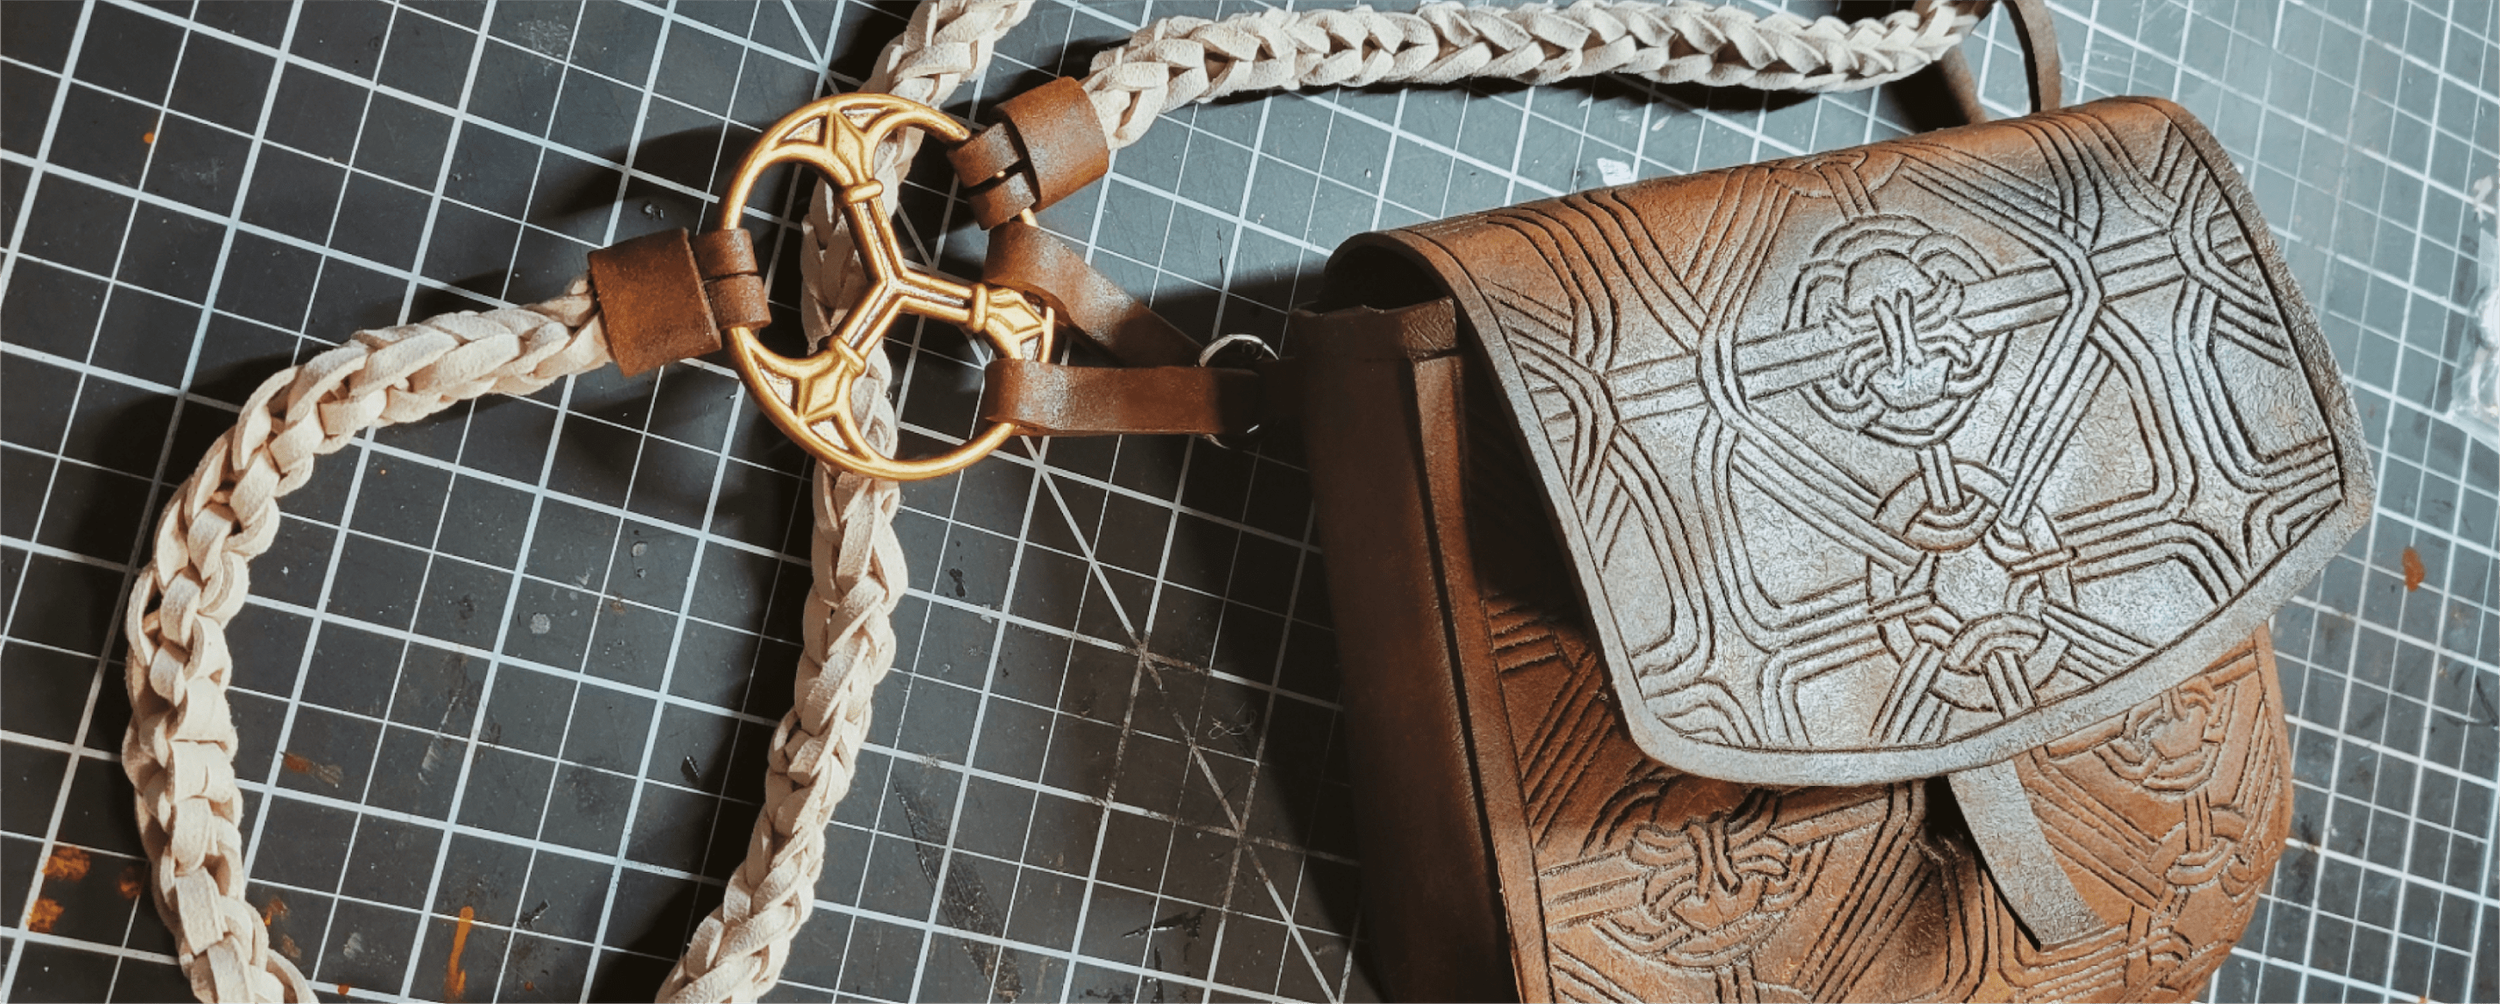 How to Make Leather Bracers